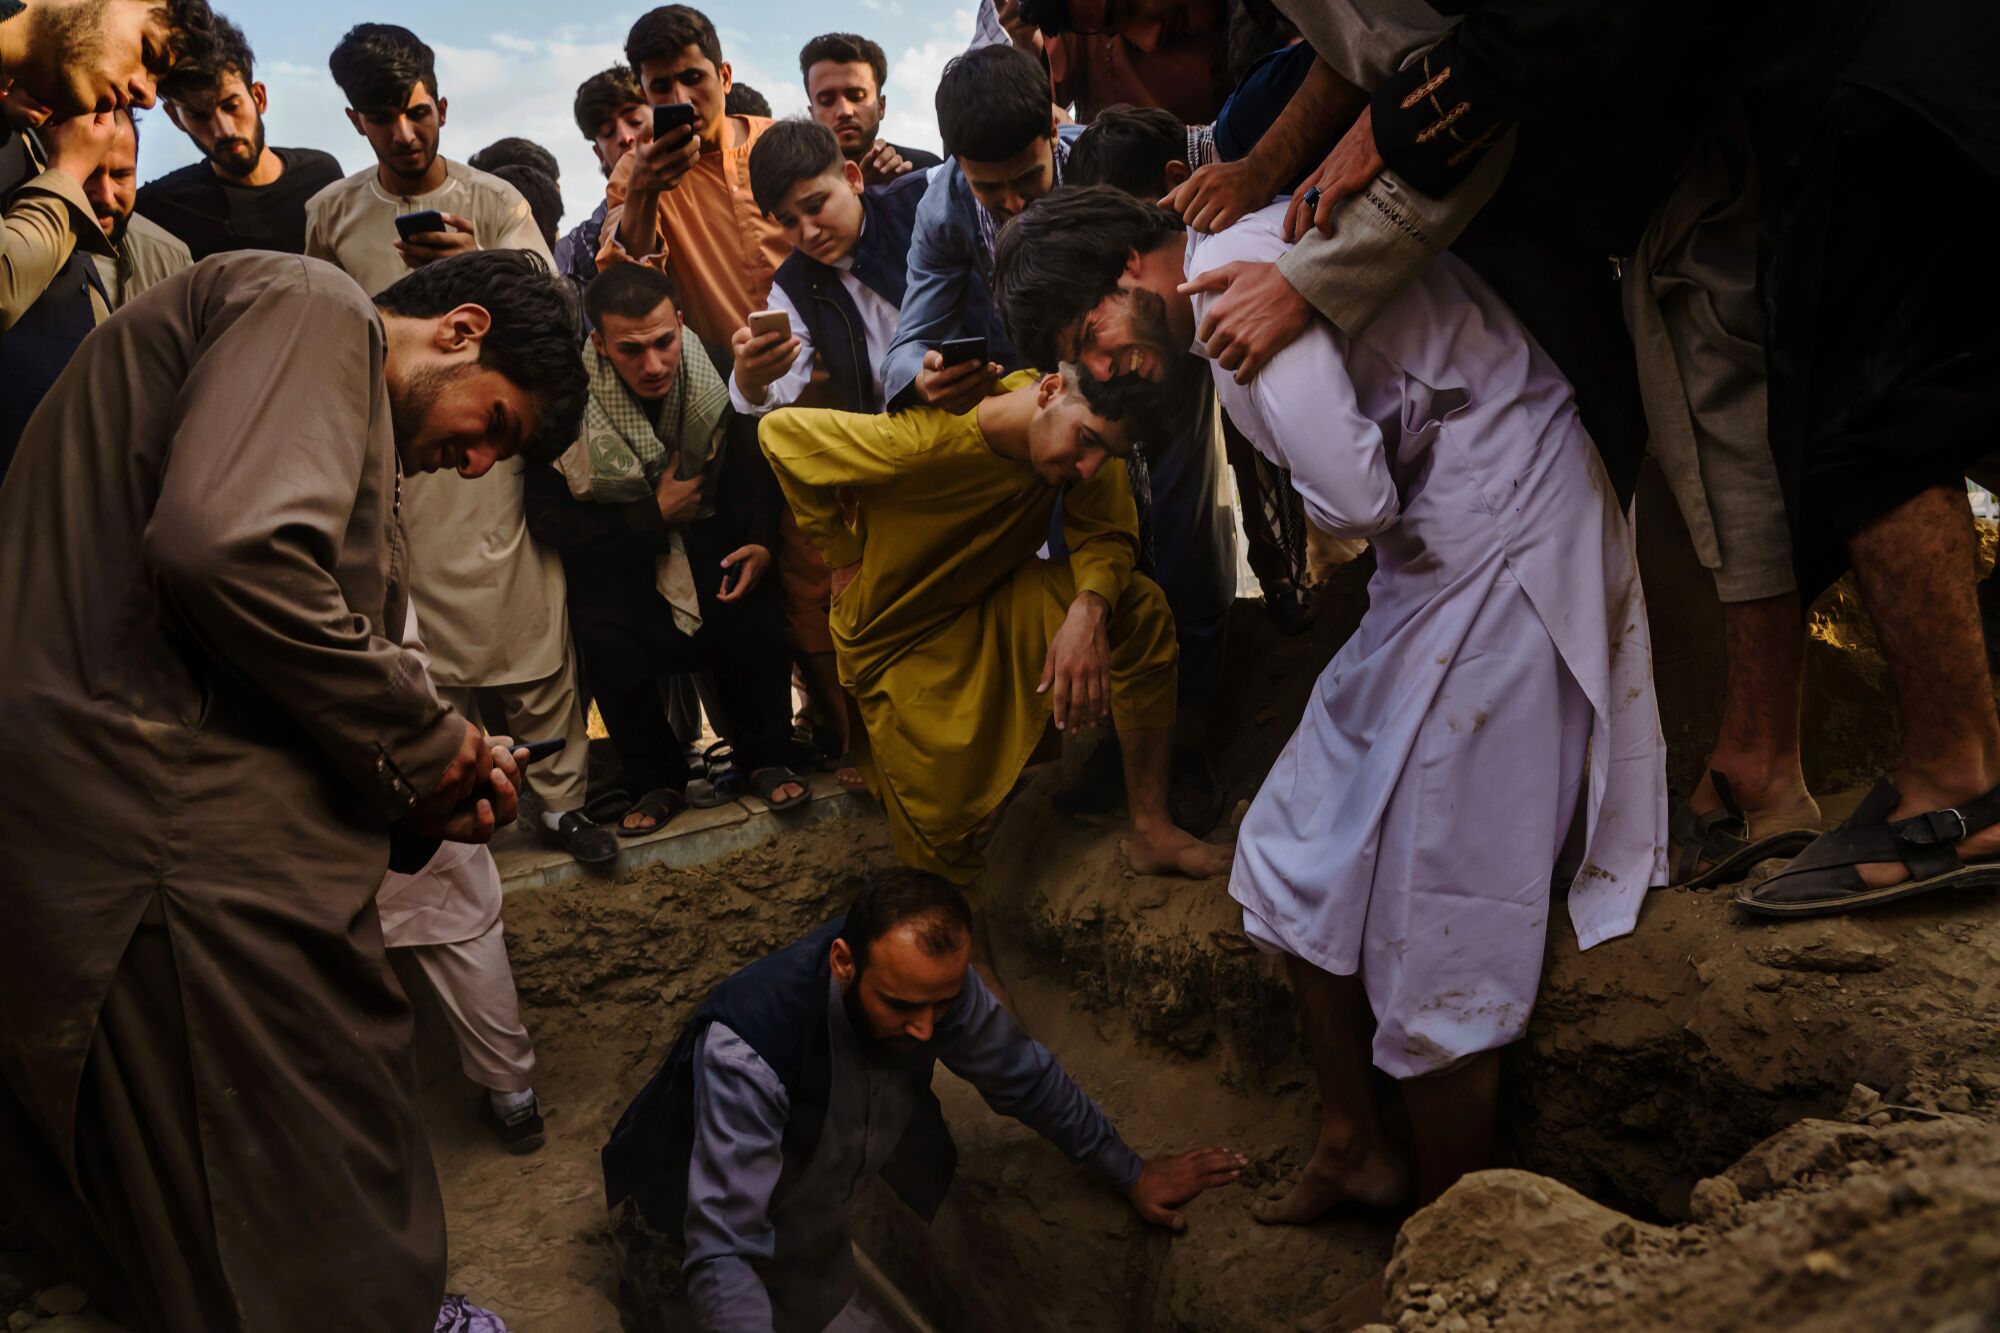 Relatives weep as they bury Nasser Ahmadi, whose family said was killed in a U.S. drone airstrike.